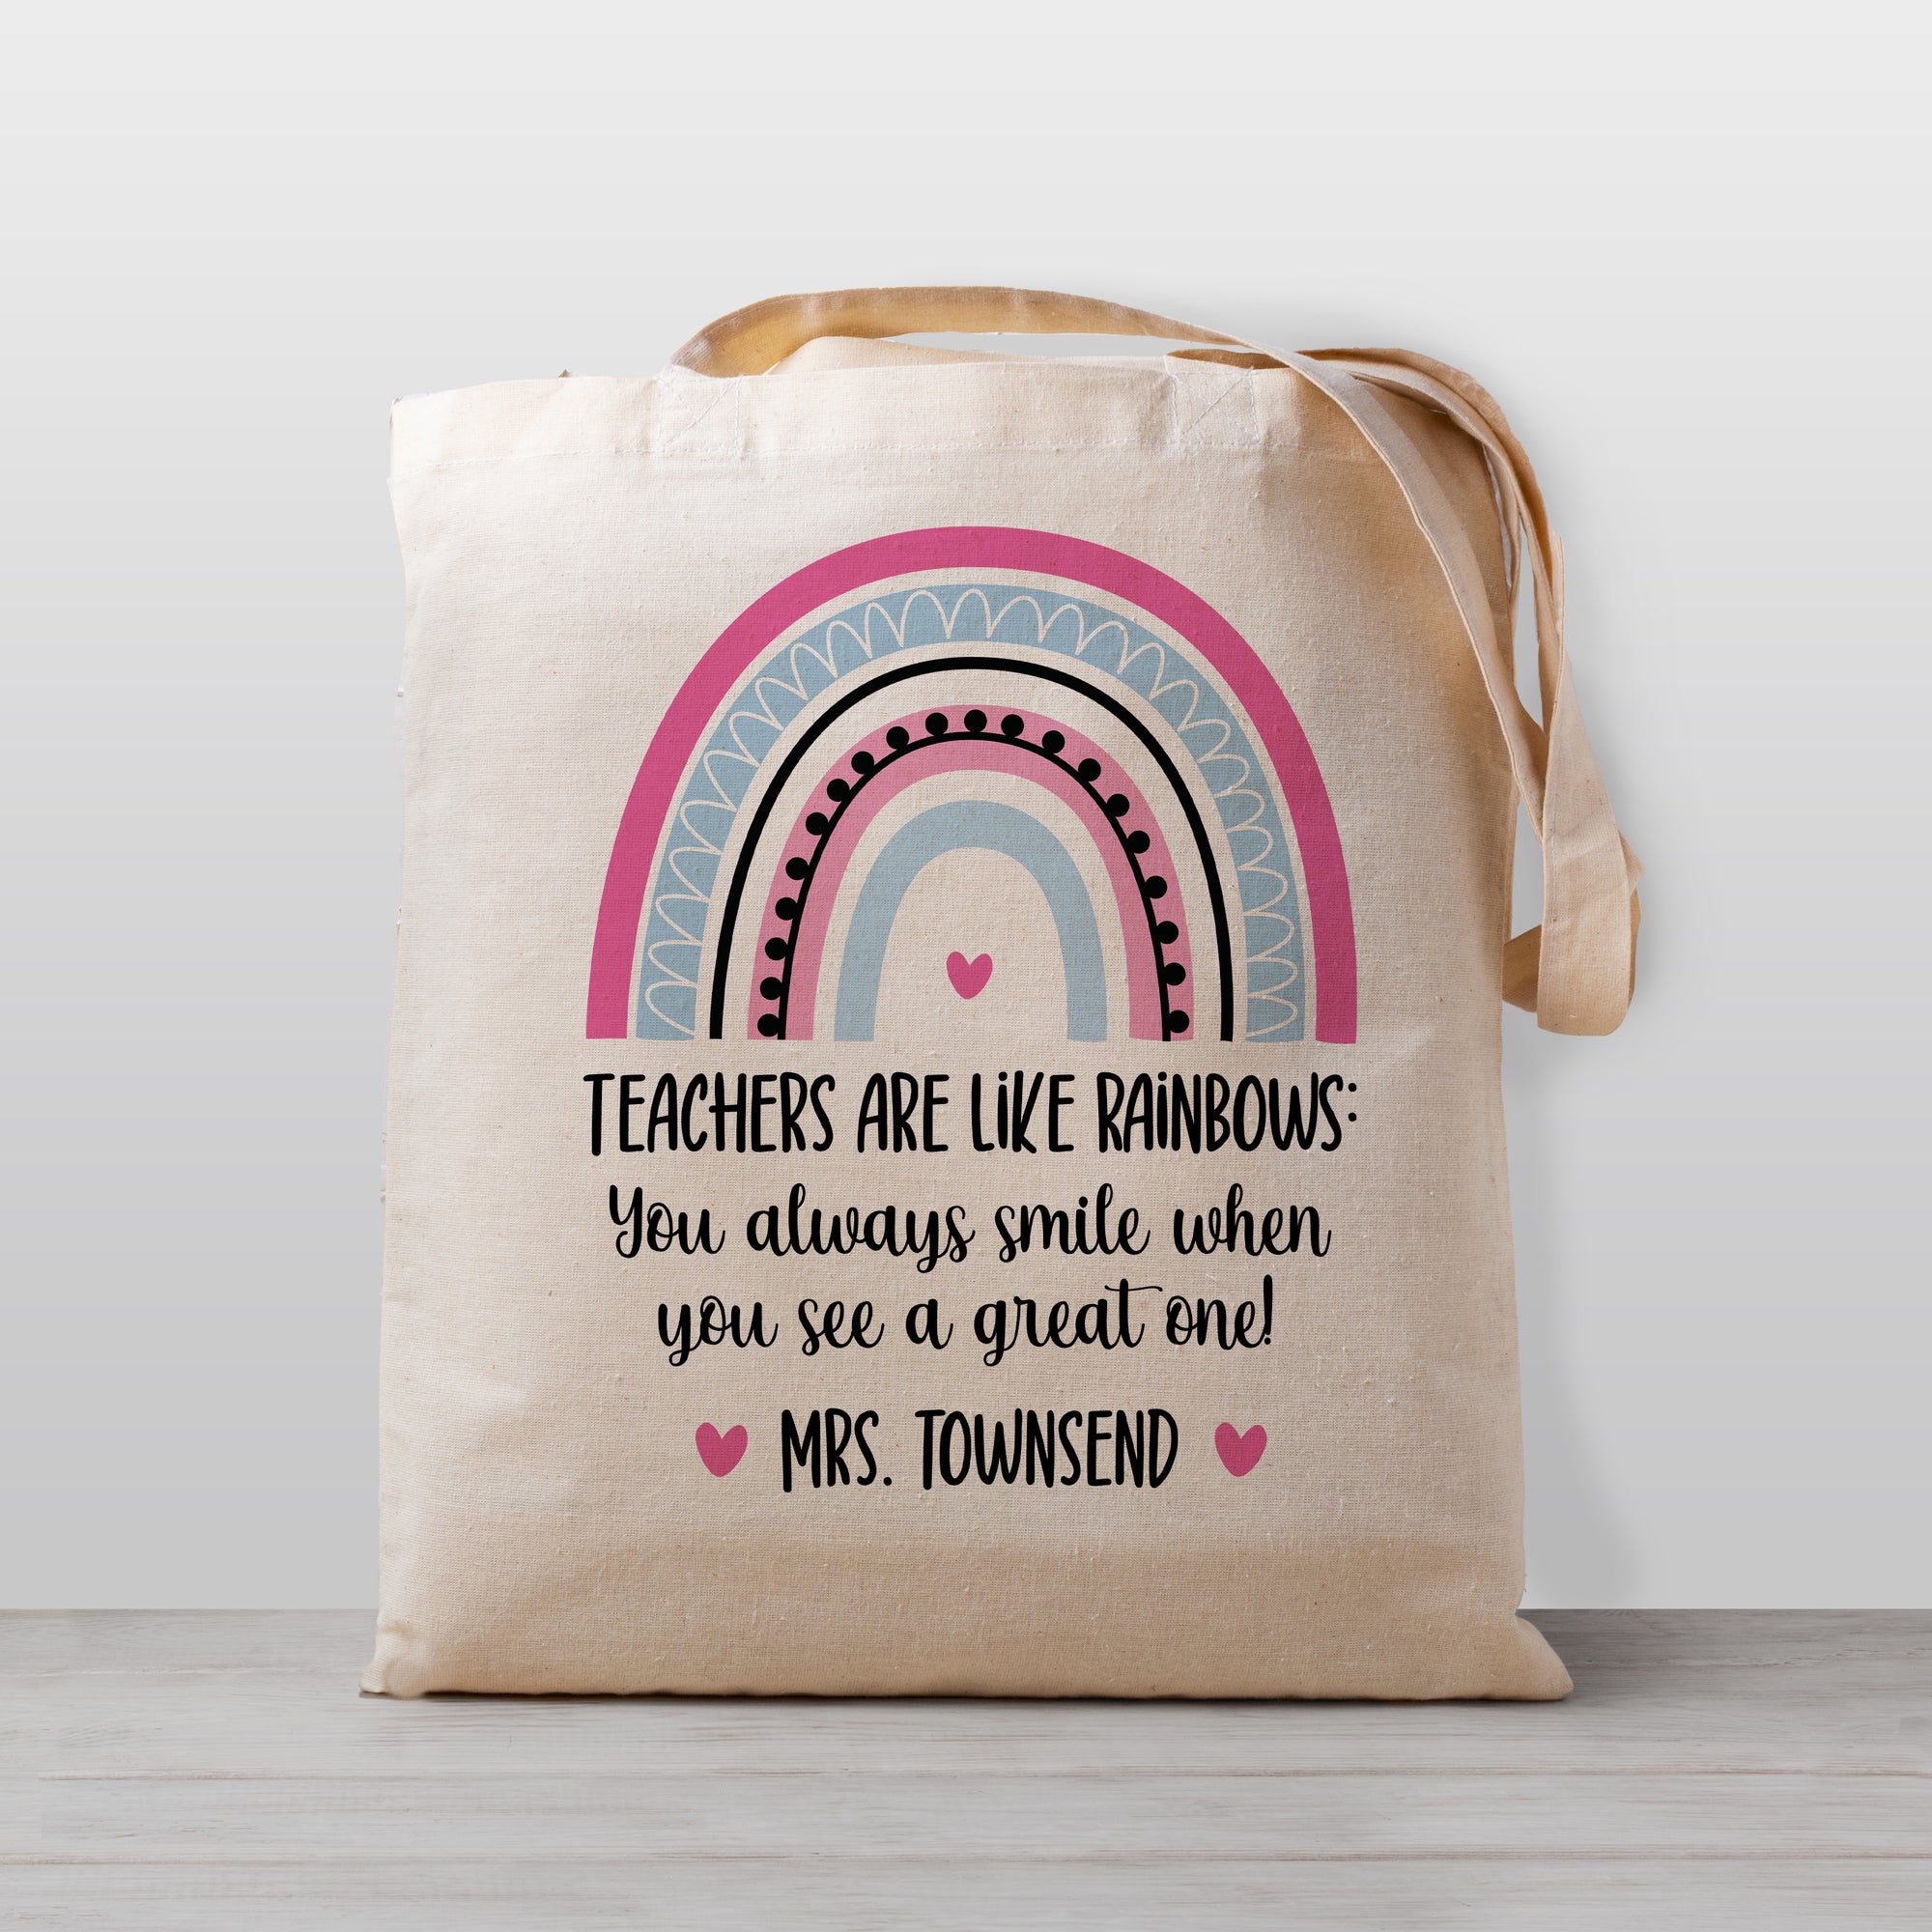 Teacher gift, Rainbow Personalized Tote bag, "Teachers are like rainbows: you always smile when you see a great one!"